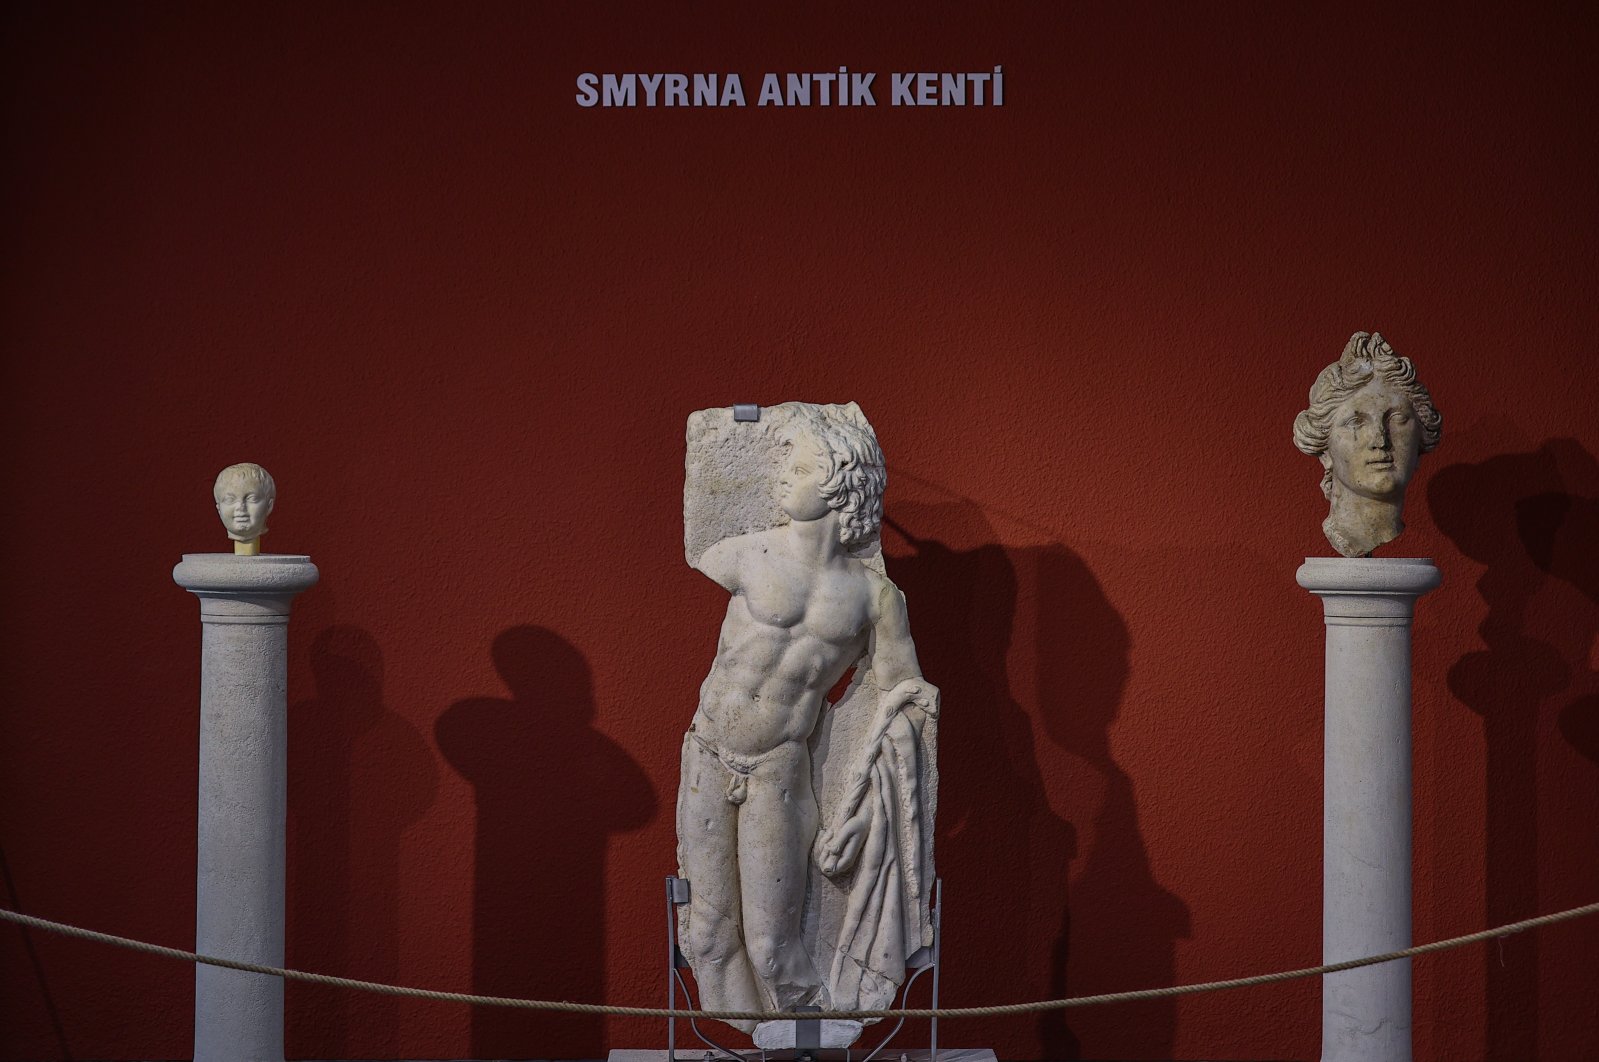 A baby head (L), the satyr relief (M) and the head of a woman, which was the first statue found in Smyrna, on display at Izmir Archaeological Museum, Izmir, western Turkey, June 30, 2021. (AA Photo)